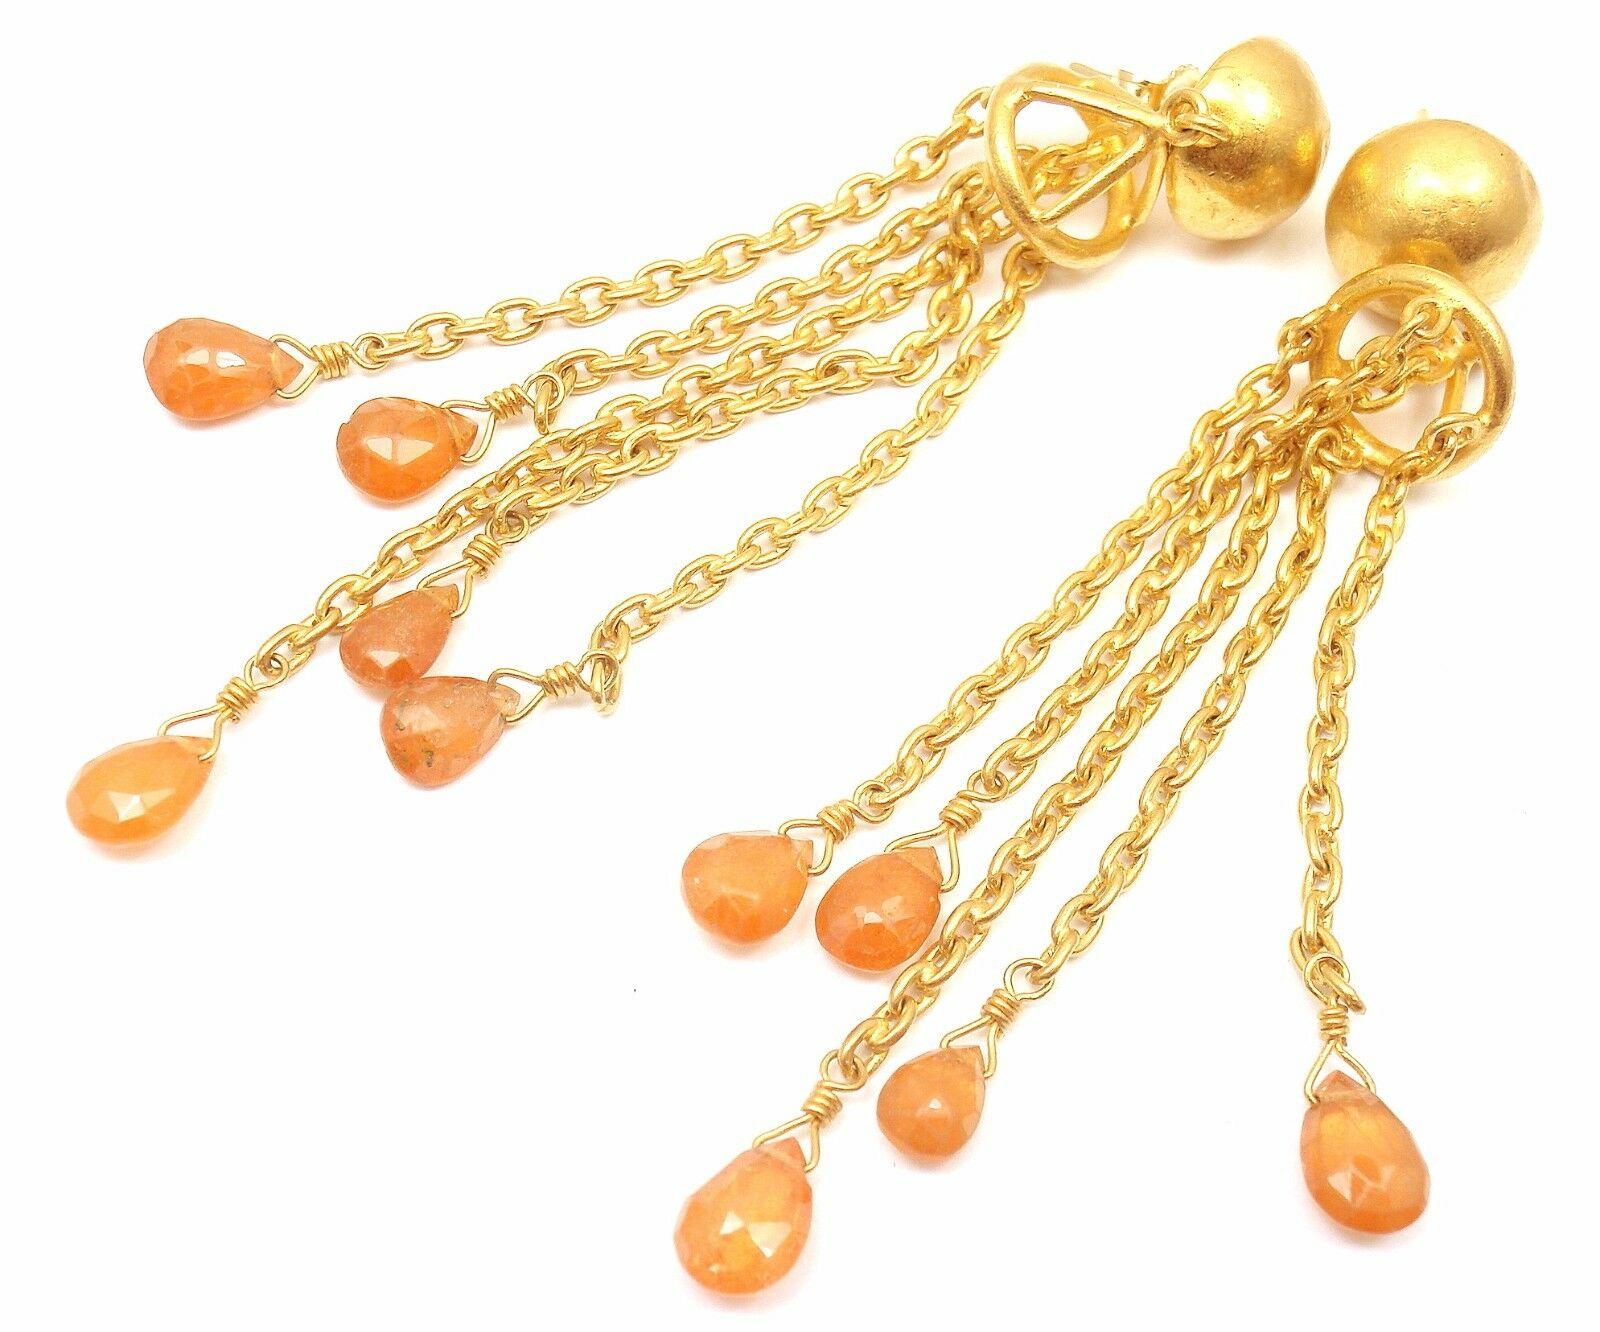 24k Yellow Gold Citrine Gemstone Drop Earrings by Yossi Harari.
With 5mm briolette citrine stones
Details:
Weight: 18 grams
Length:3 inches long
Stamped Hallmarks: Yossi 24k
*Free Shipping within the United States*
YOUR PRICE: $4,000
t522mhtd